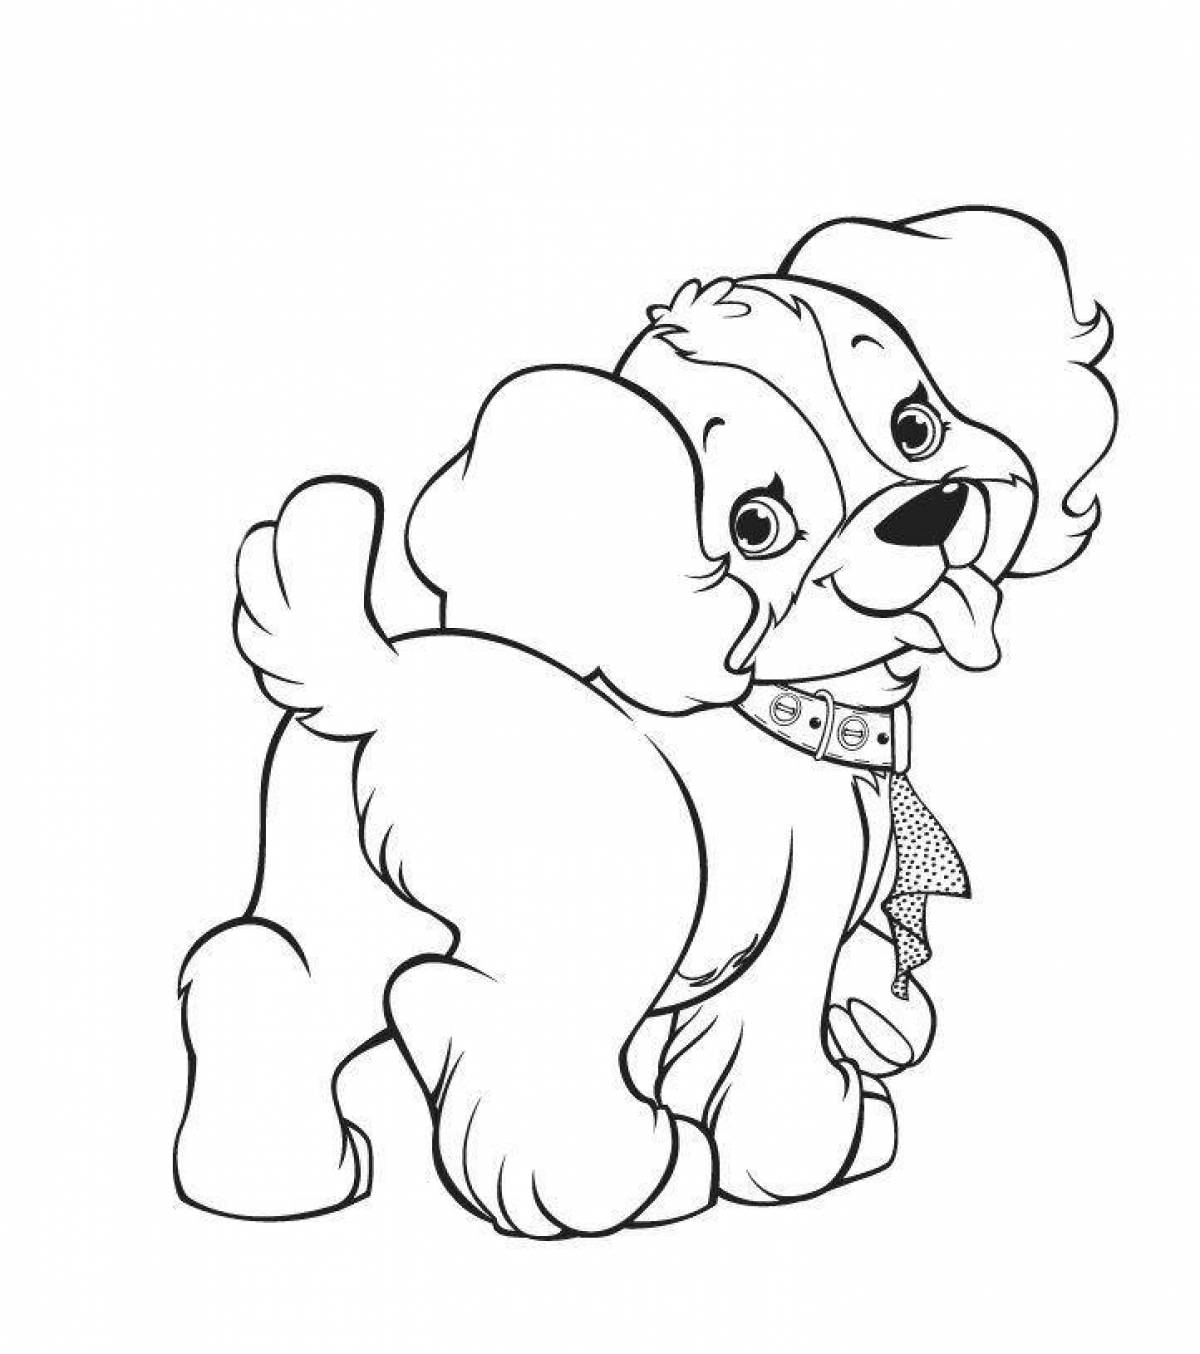 Naughty puppy coloring book